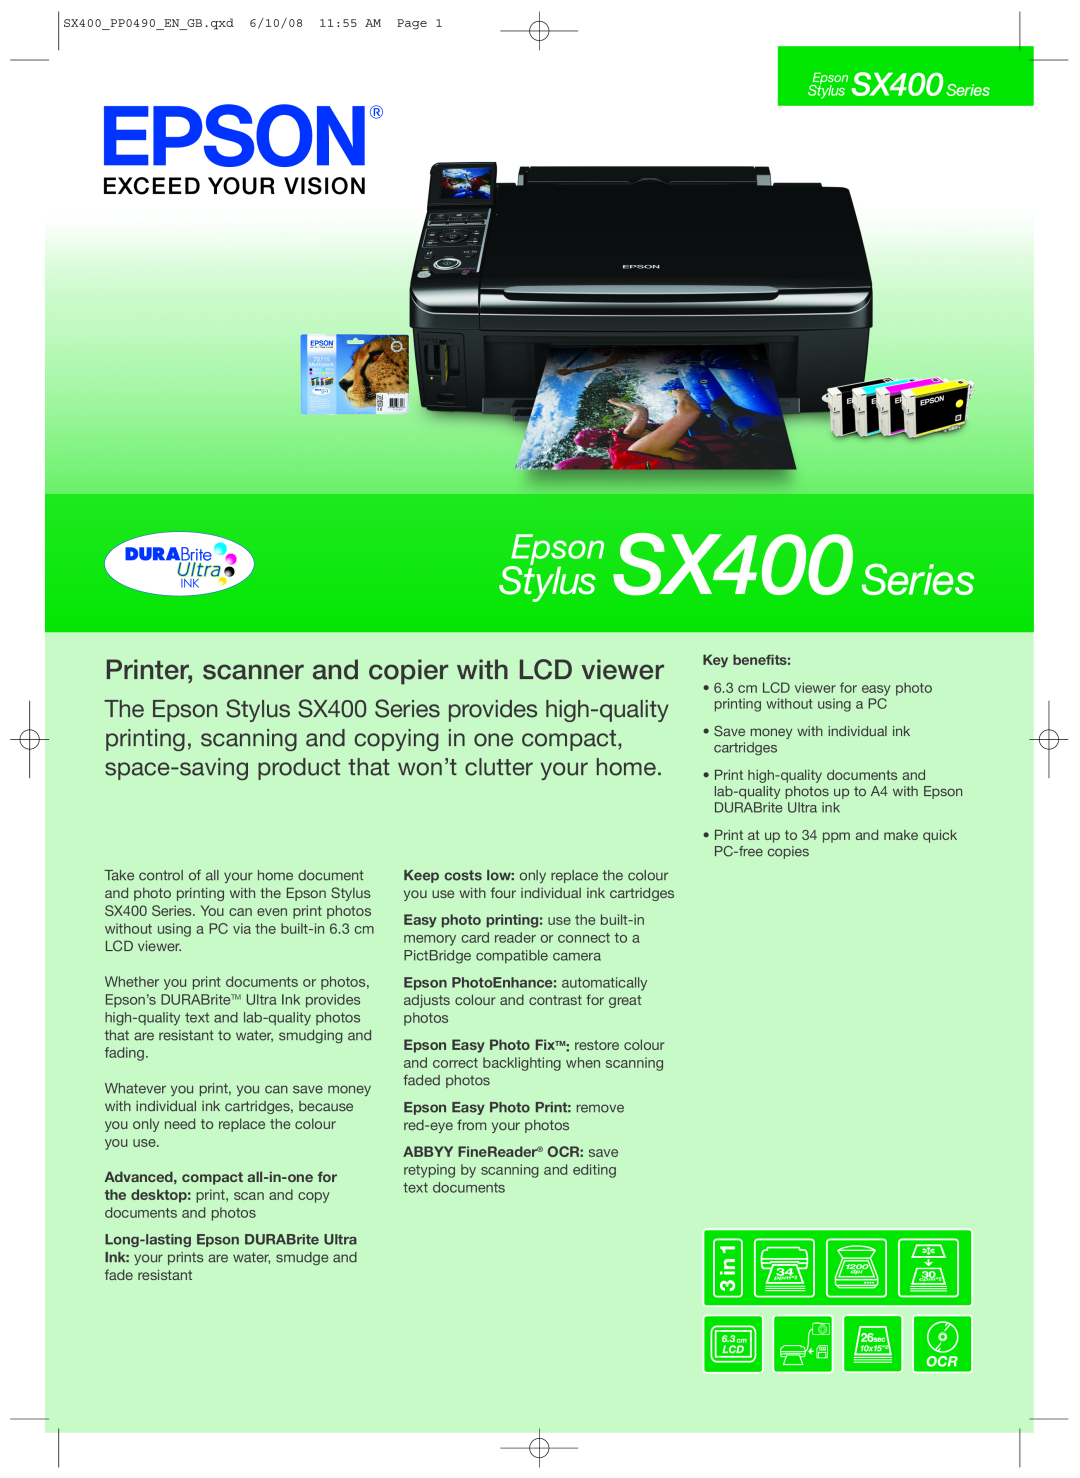 Epson SX400 manual Printer, scanner and copier with LCD viewer 